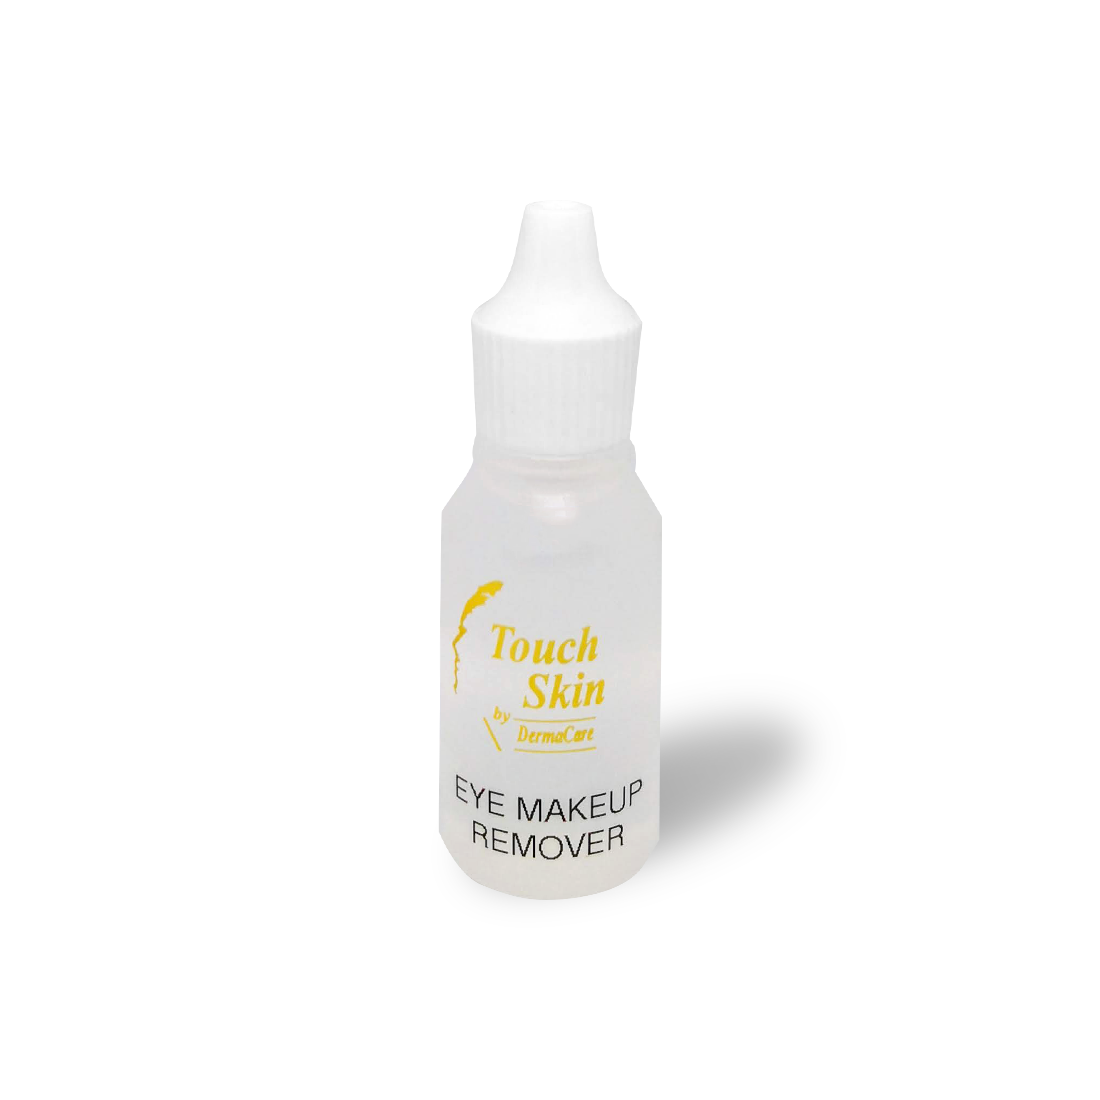 Eye Makeup Remover - Dermacare Therapeutic Skincare